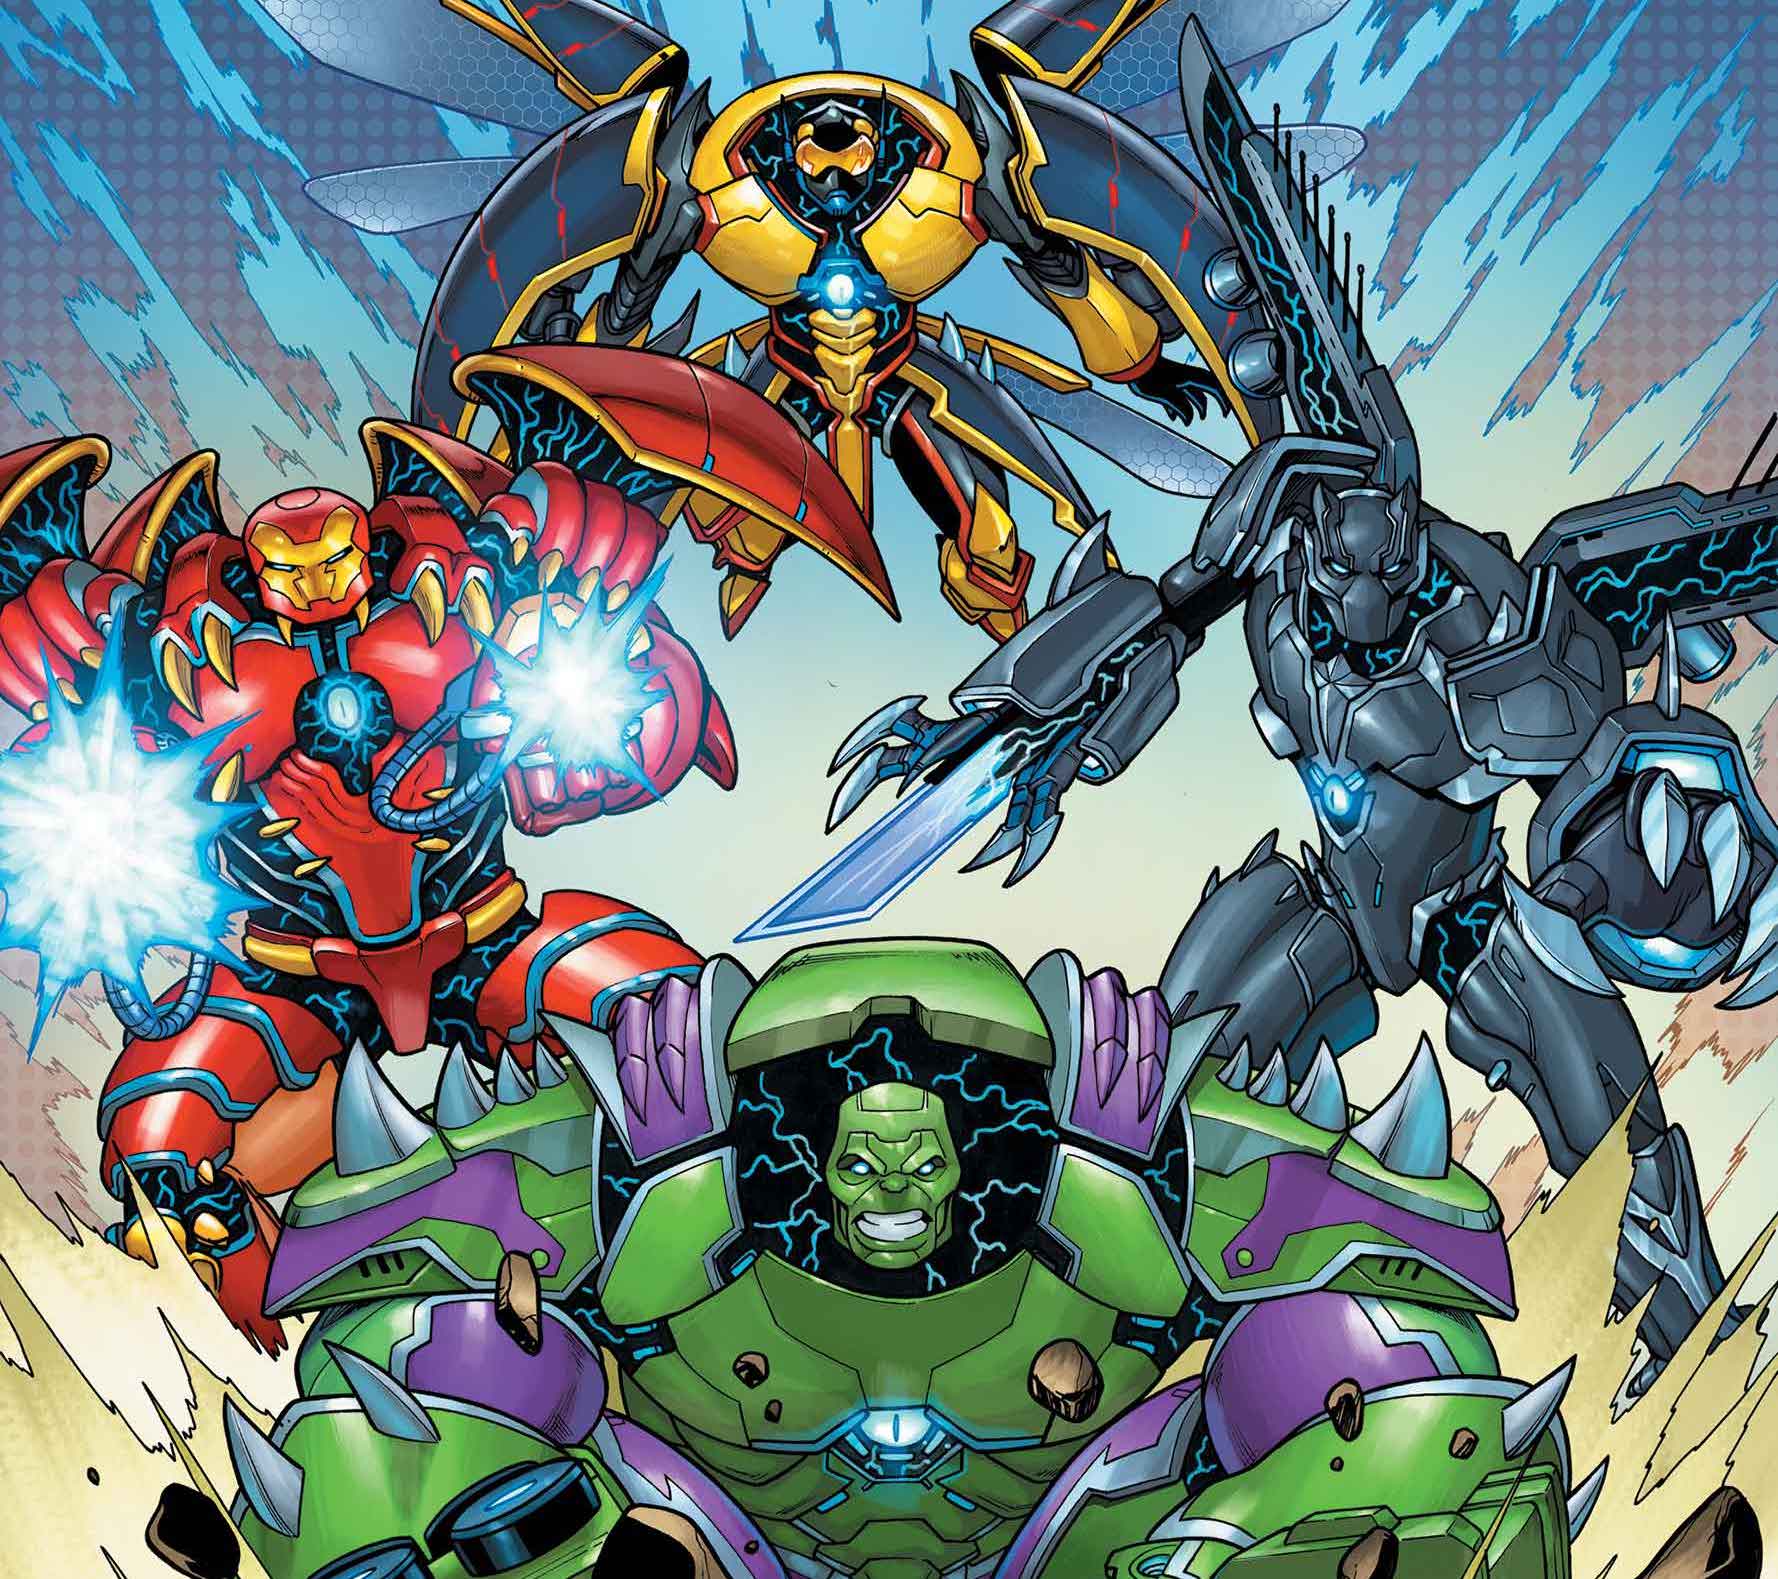 The Avengers get an upgrade to fight monsters in 'Mech Strike: Monster Hunters' #1